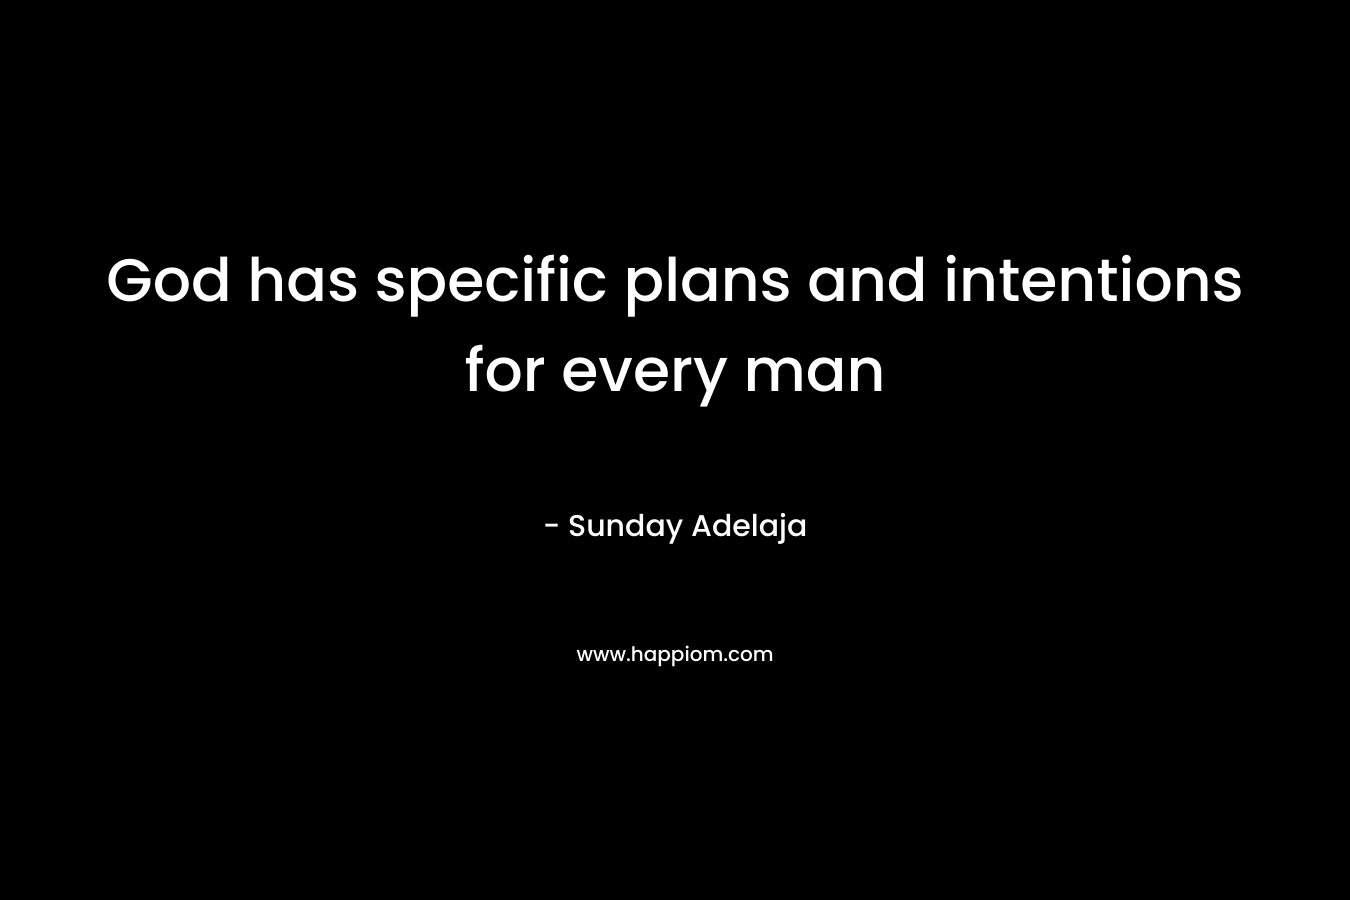 God has specific plans and intentions for every man